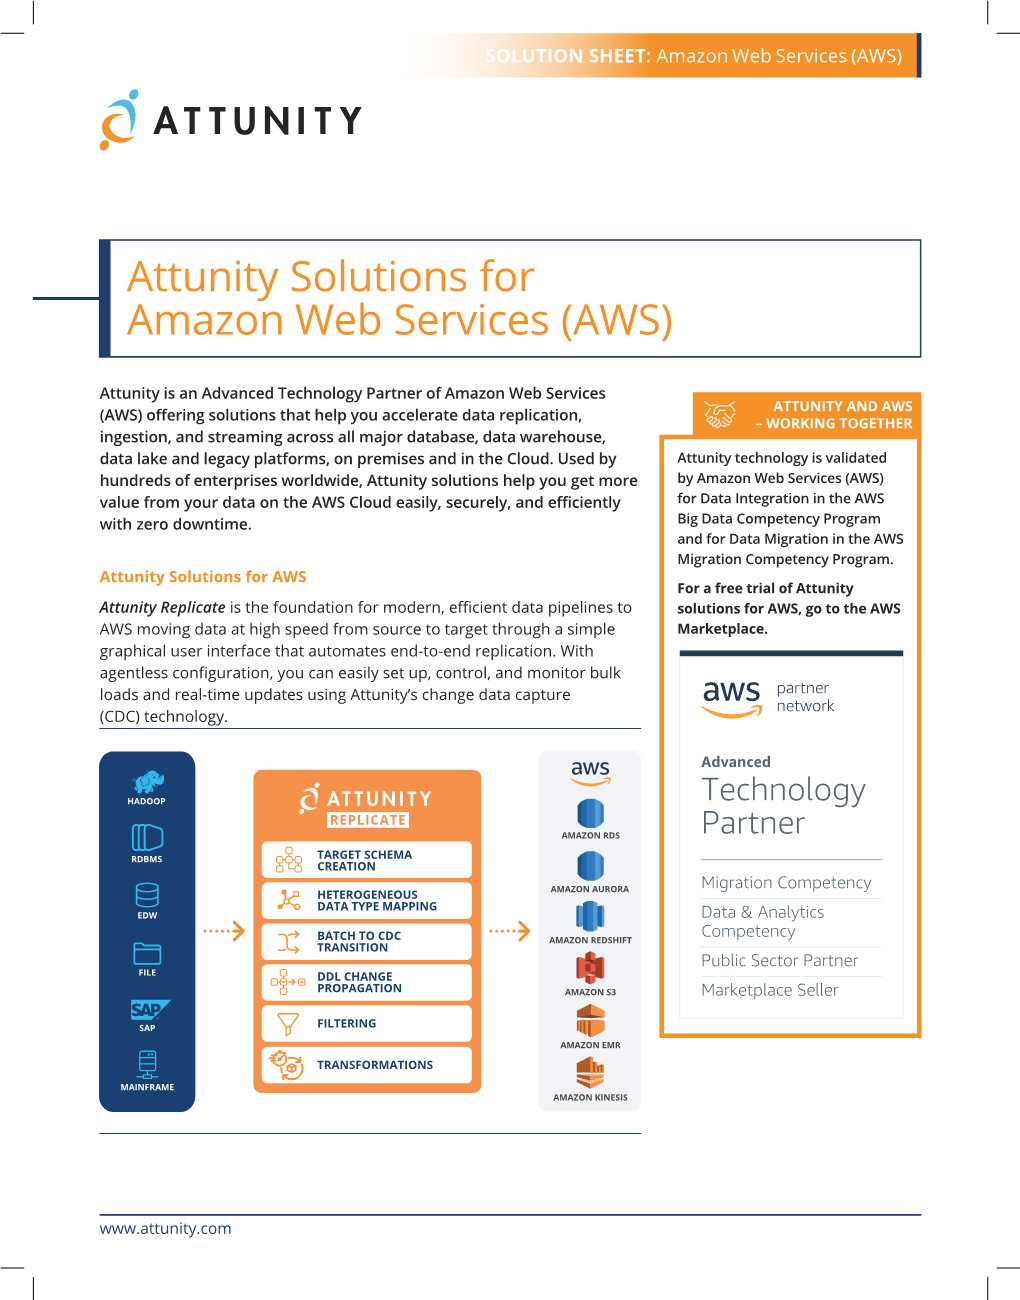 Attunity Solutions for Amazon Web Services (AWS)